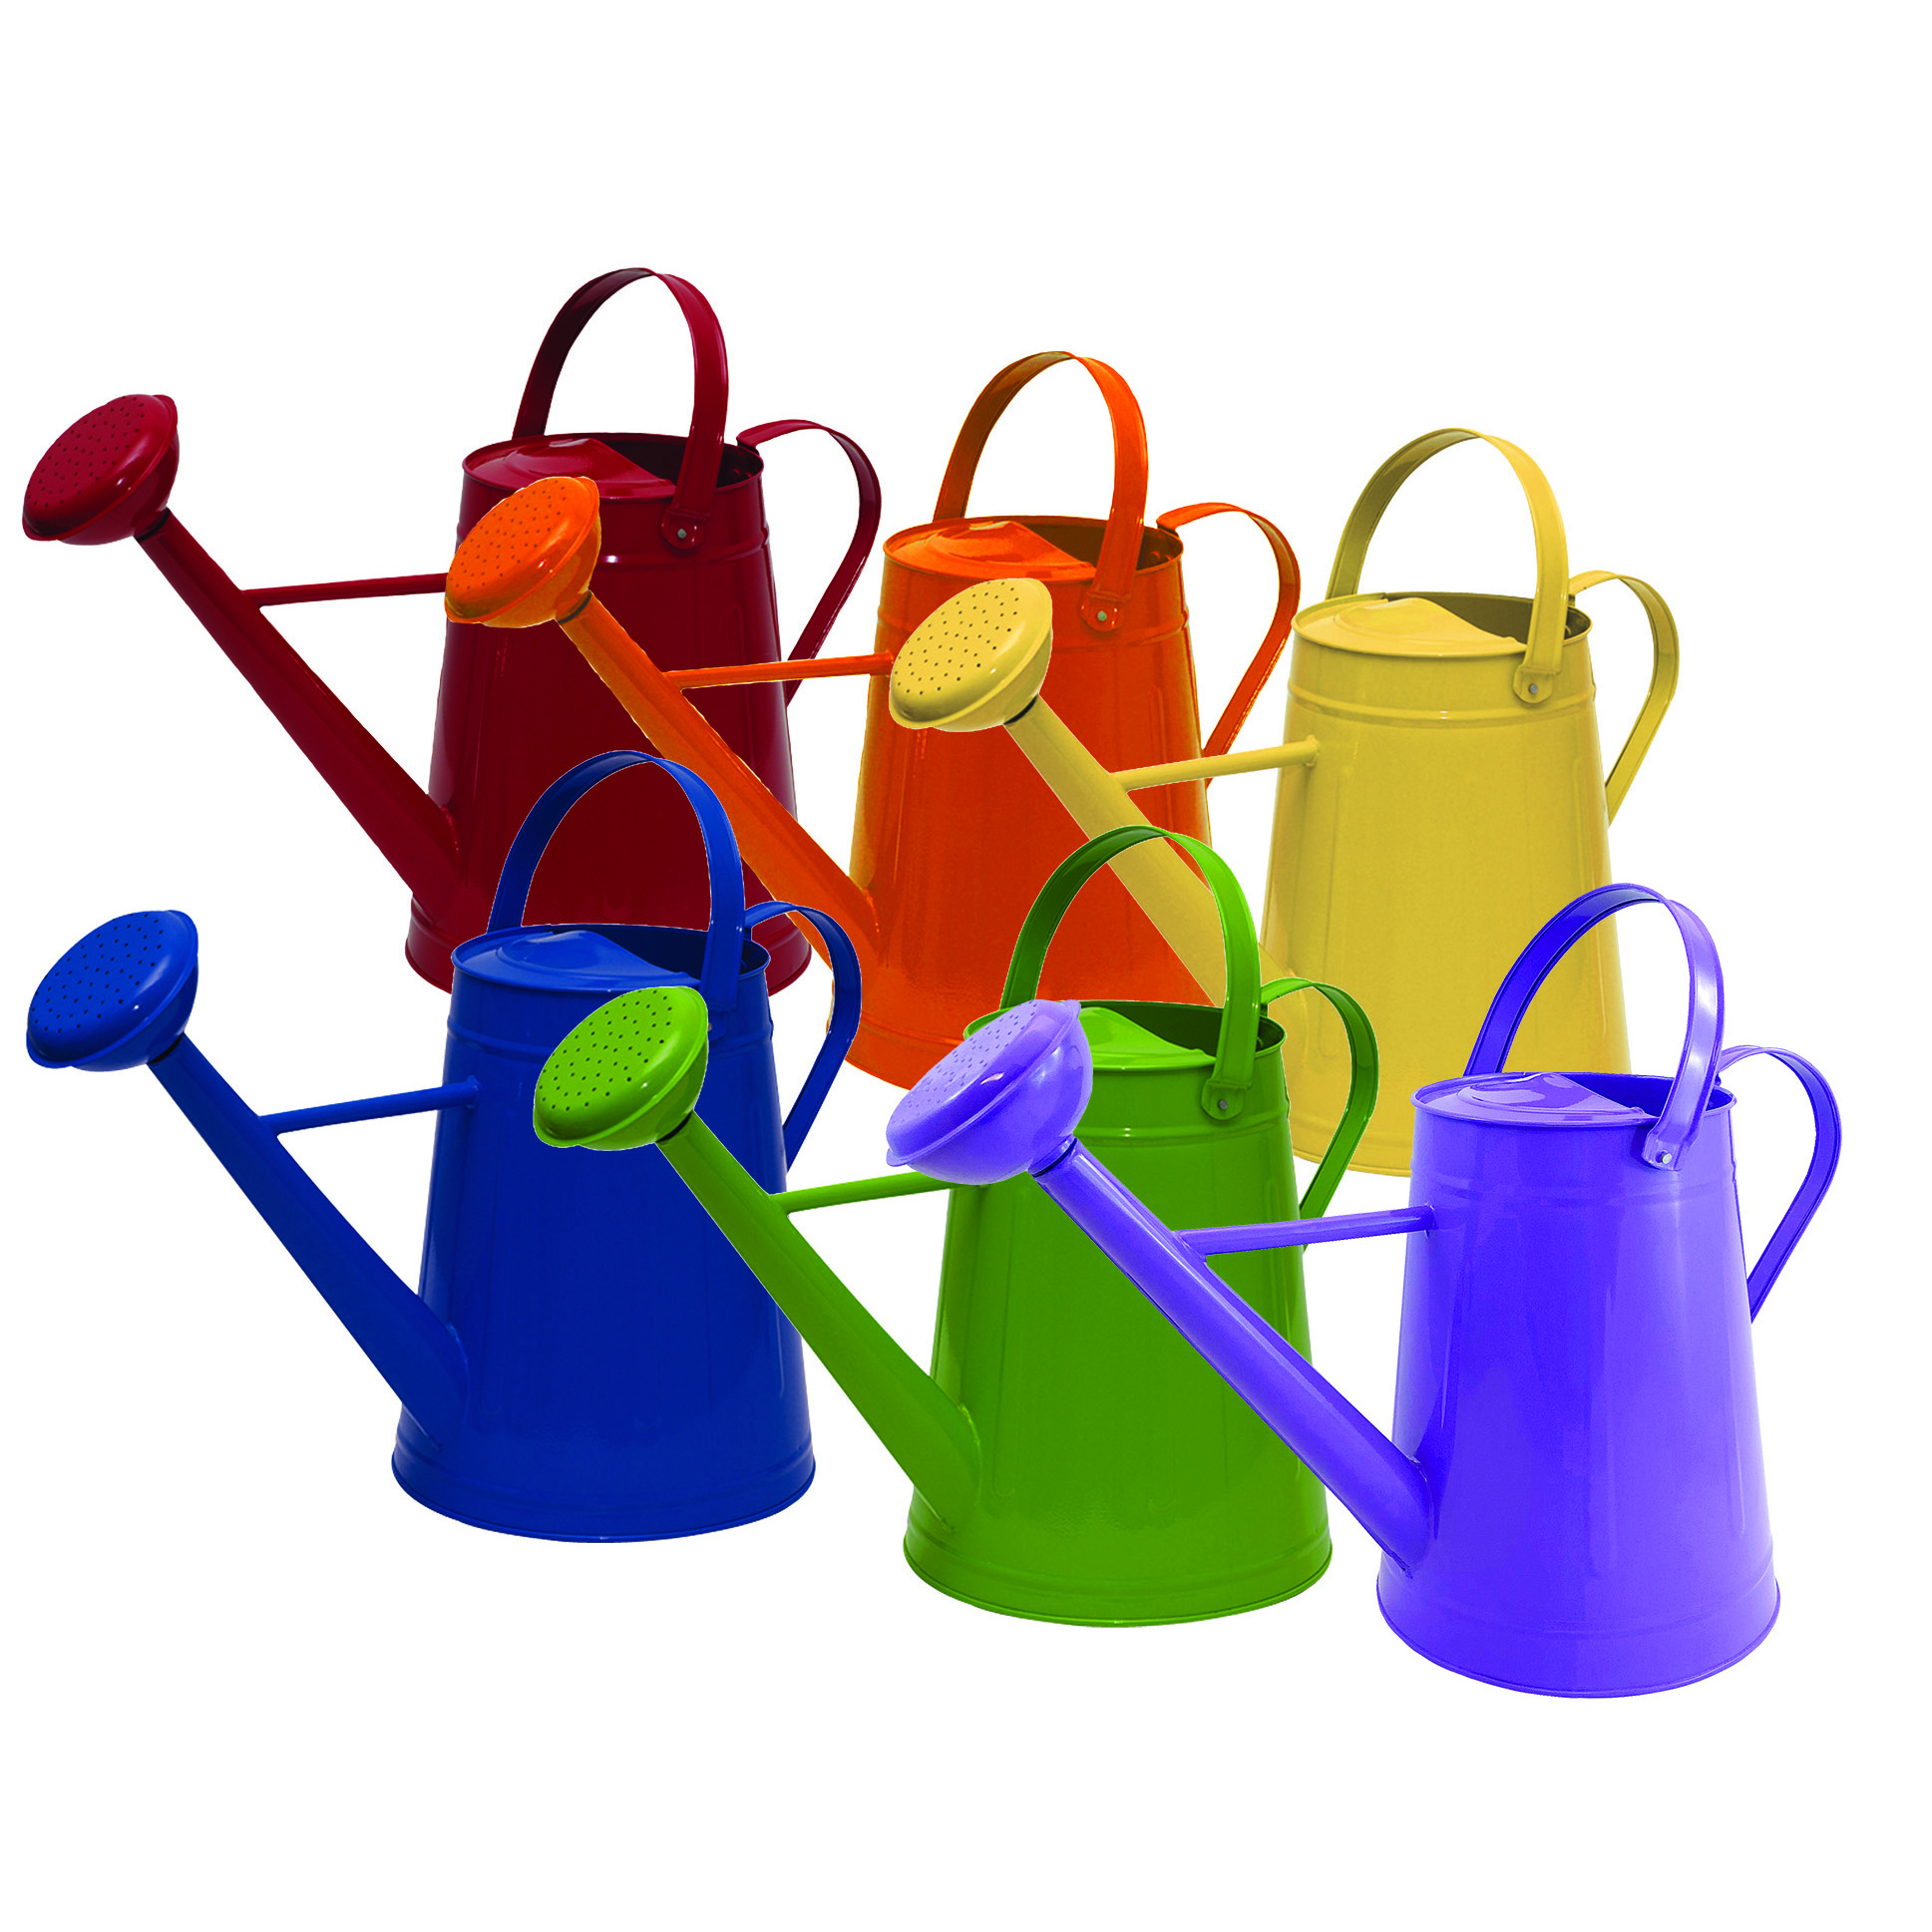 2.1 g Mixed Metal Watering Can